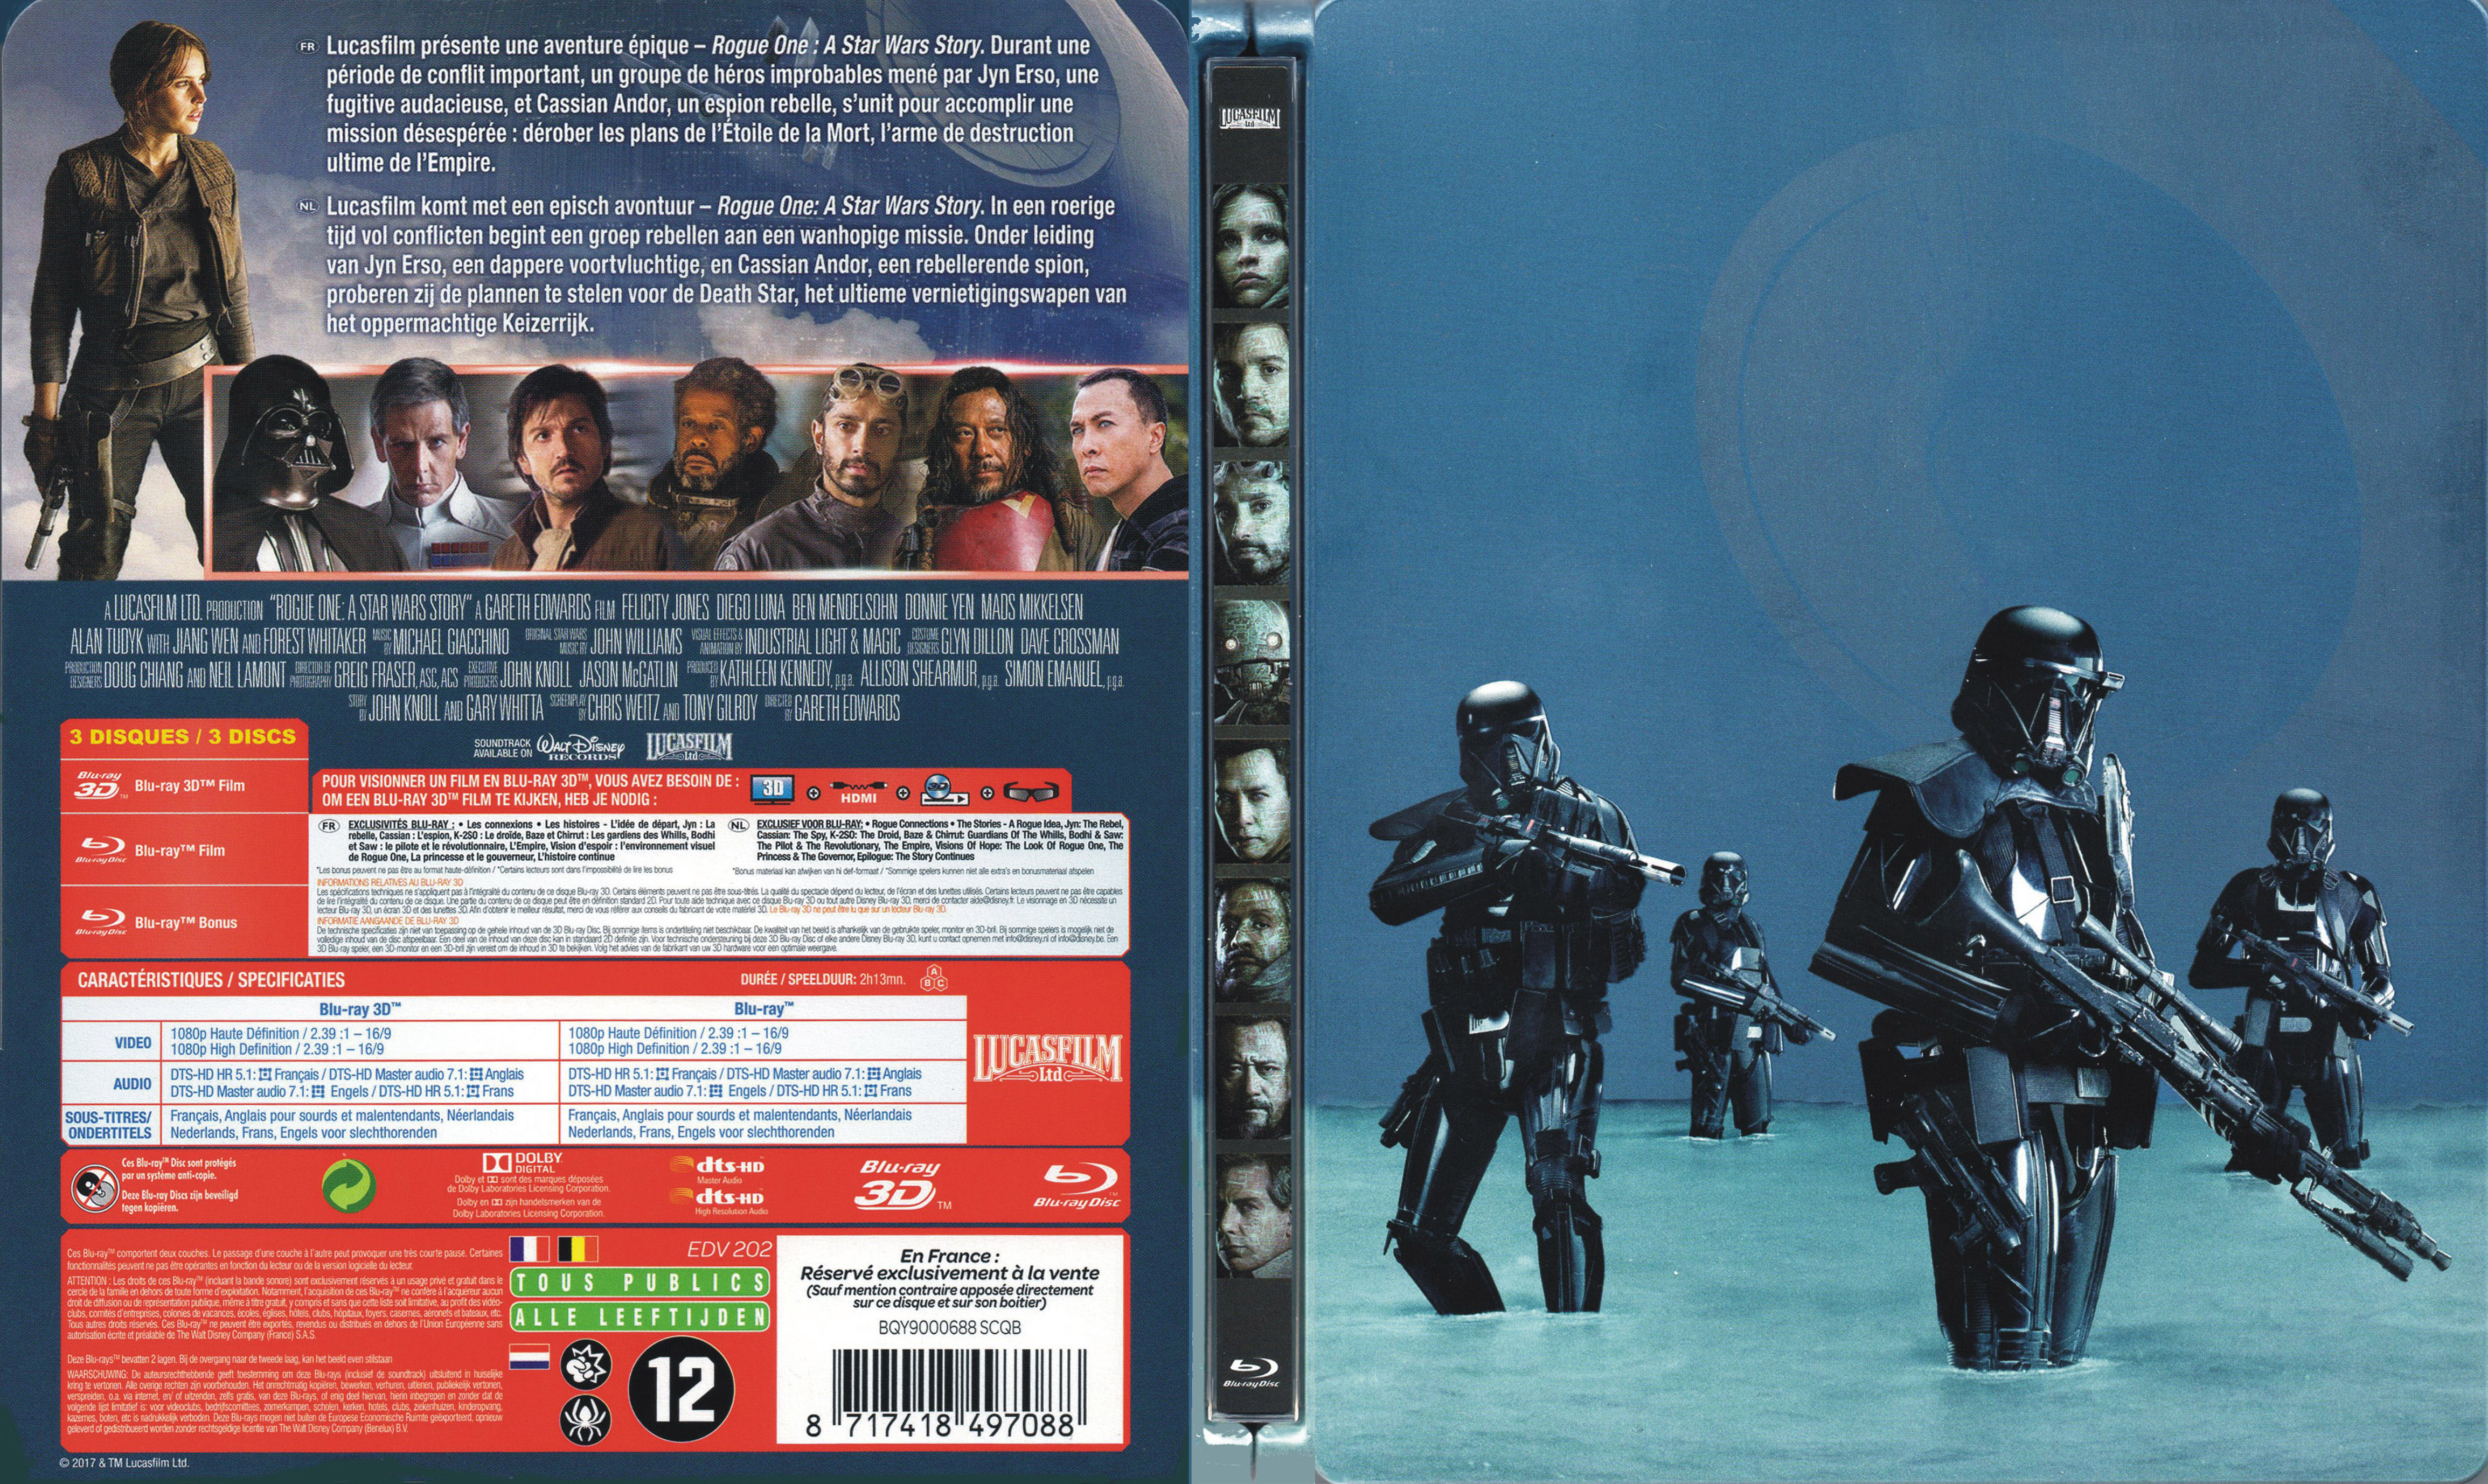 Jaquette DVD Rogue One: A Star Wars Story 3D (BLU-RAY)